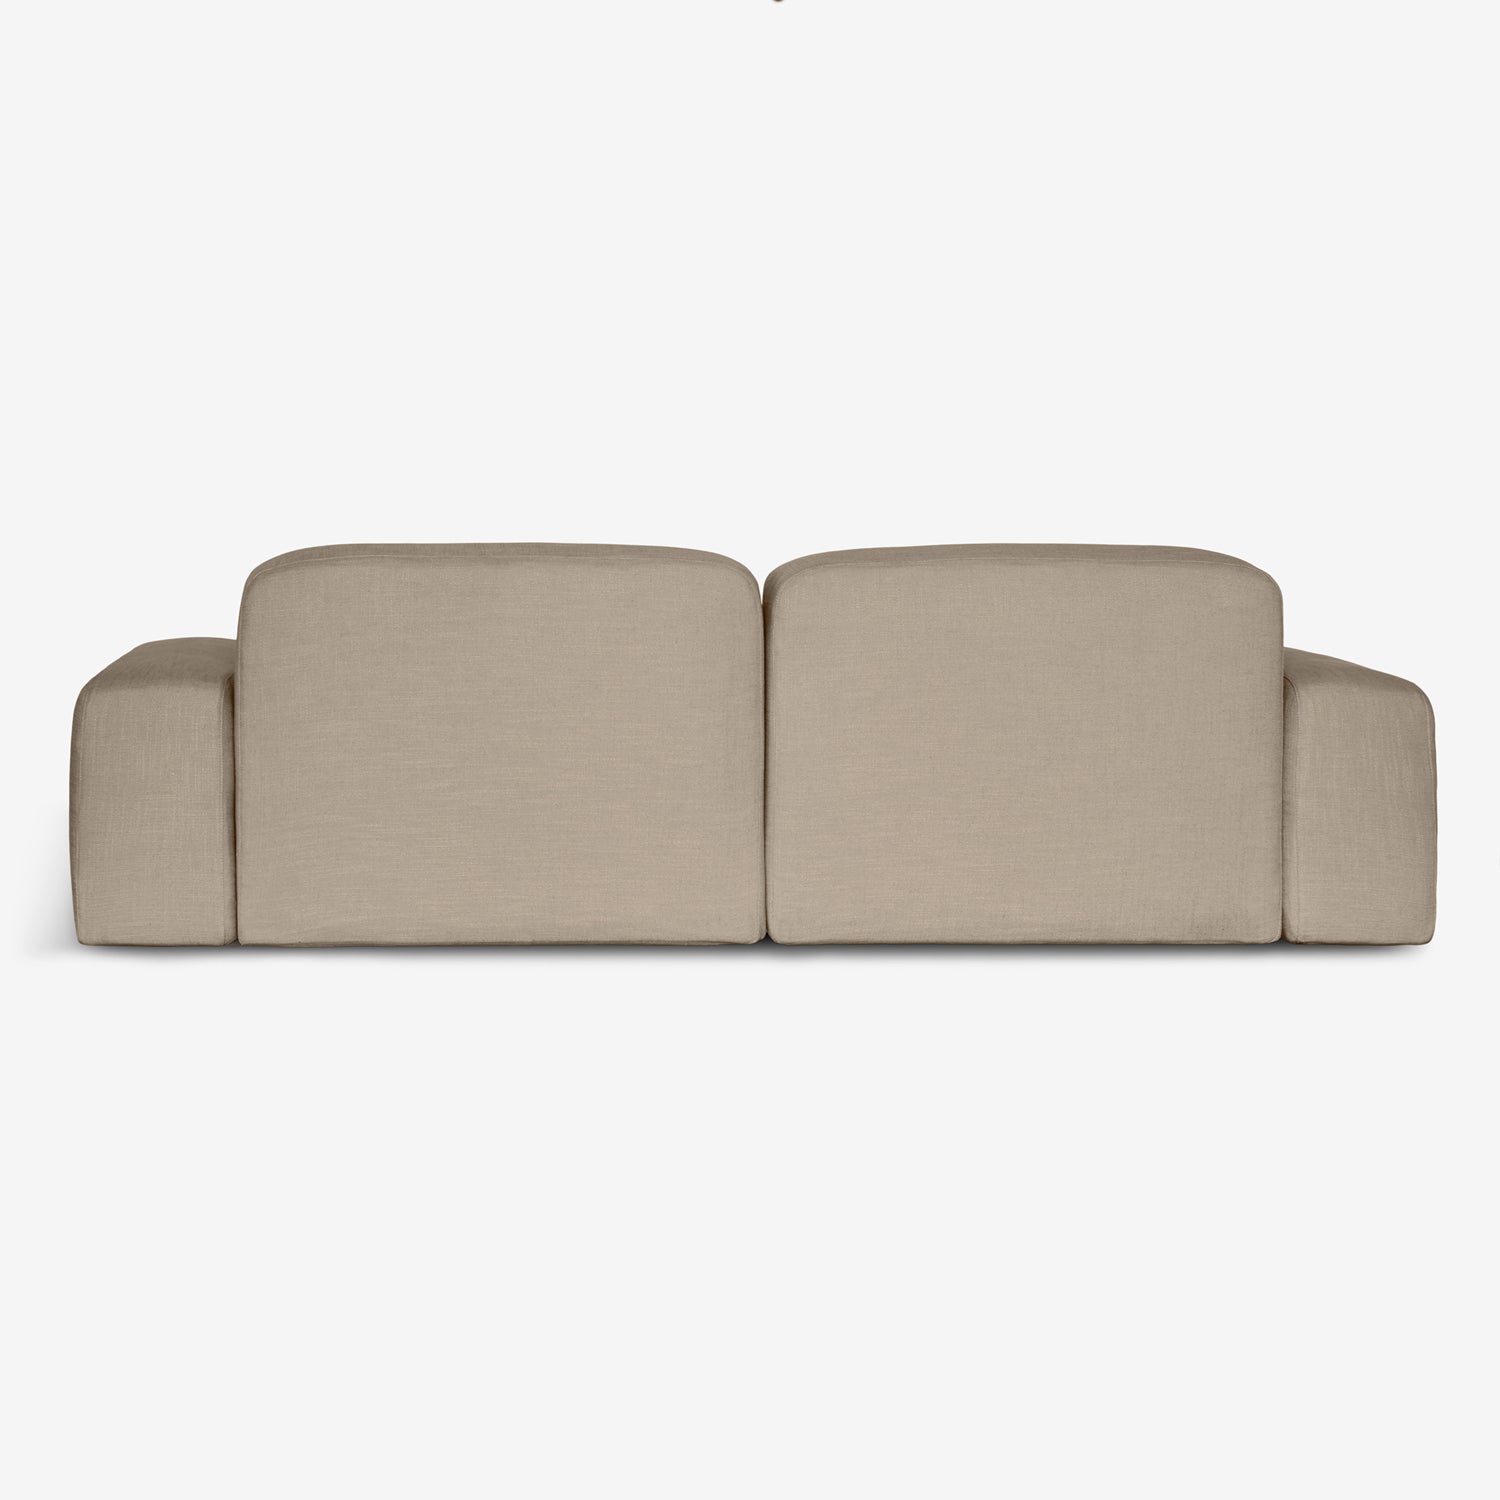 Libero Series: Stylish and Green, backview of beige sofa